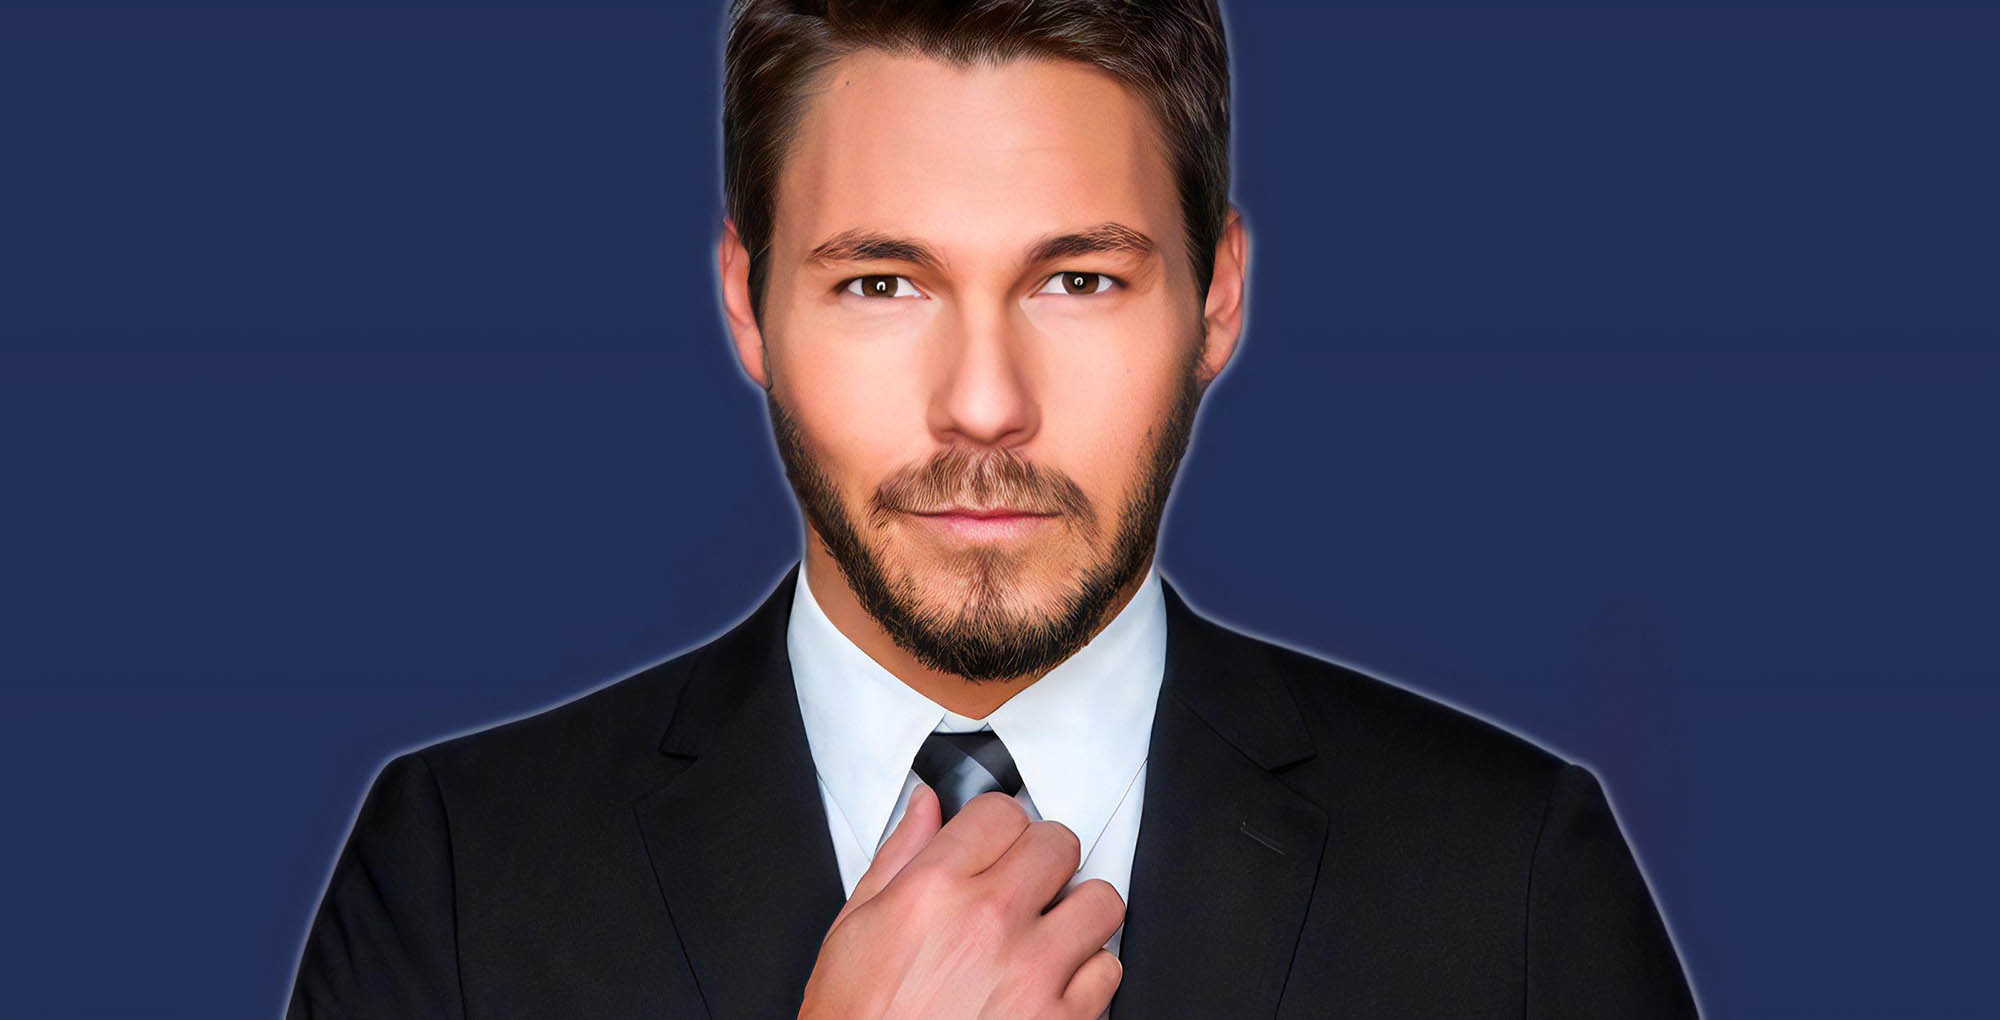 bold and the beautiful star scott clifton celebrates his birthday.